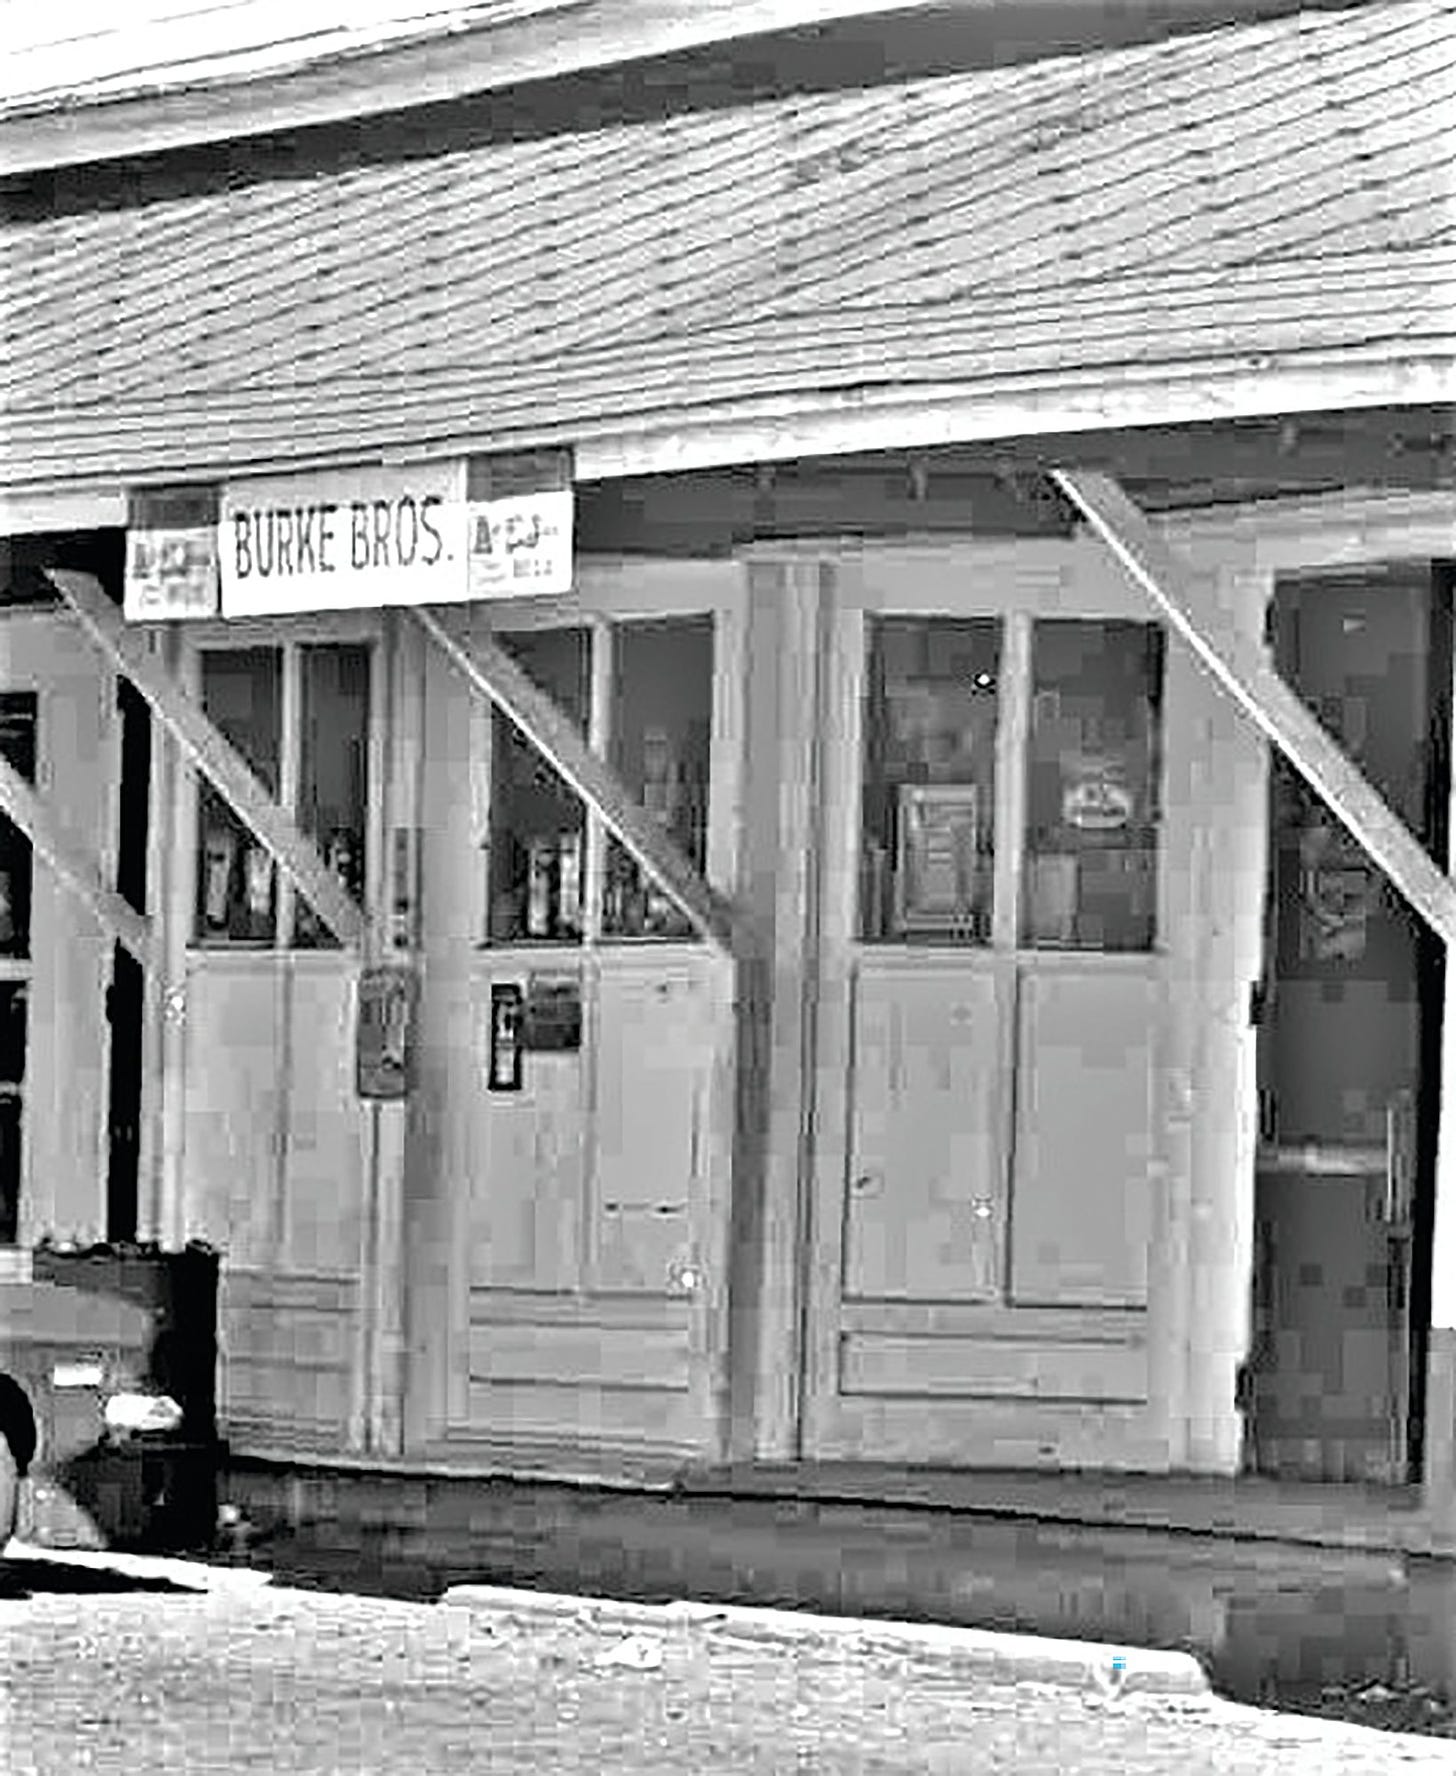 Reflections by Sumter Item archivist and historian Sammy Way: The D. W.  Alderman & Sons Lumber Mill and Store | The Sumter Item